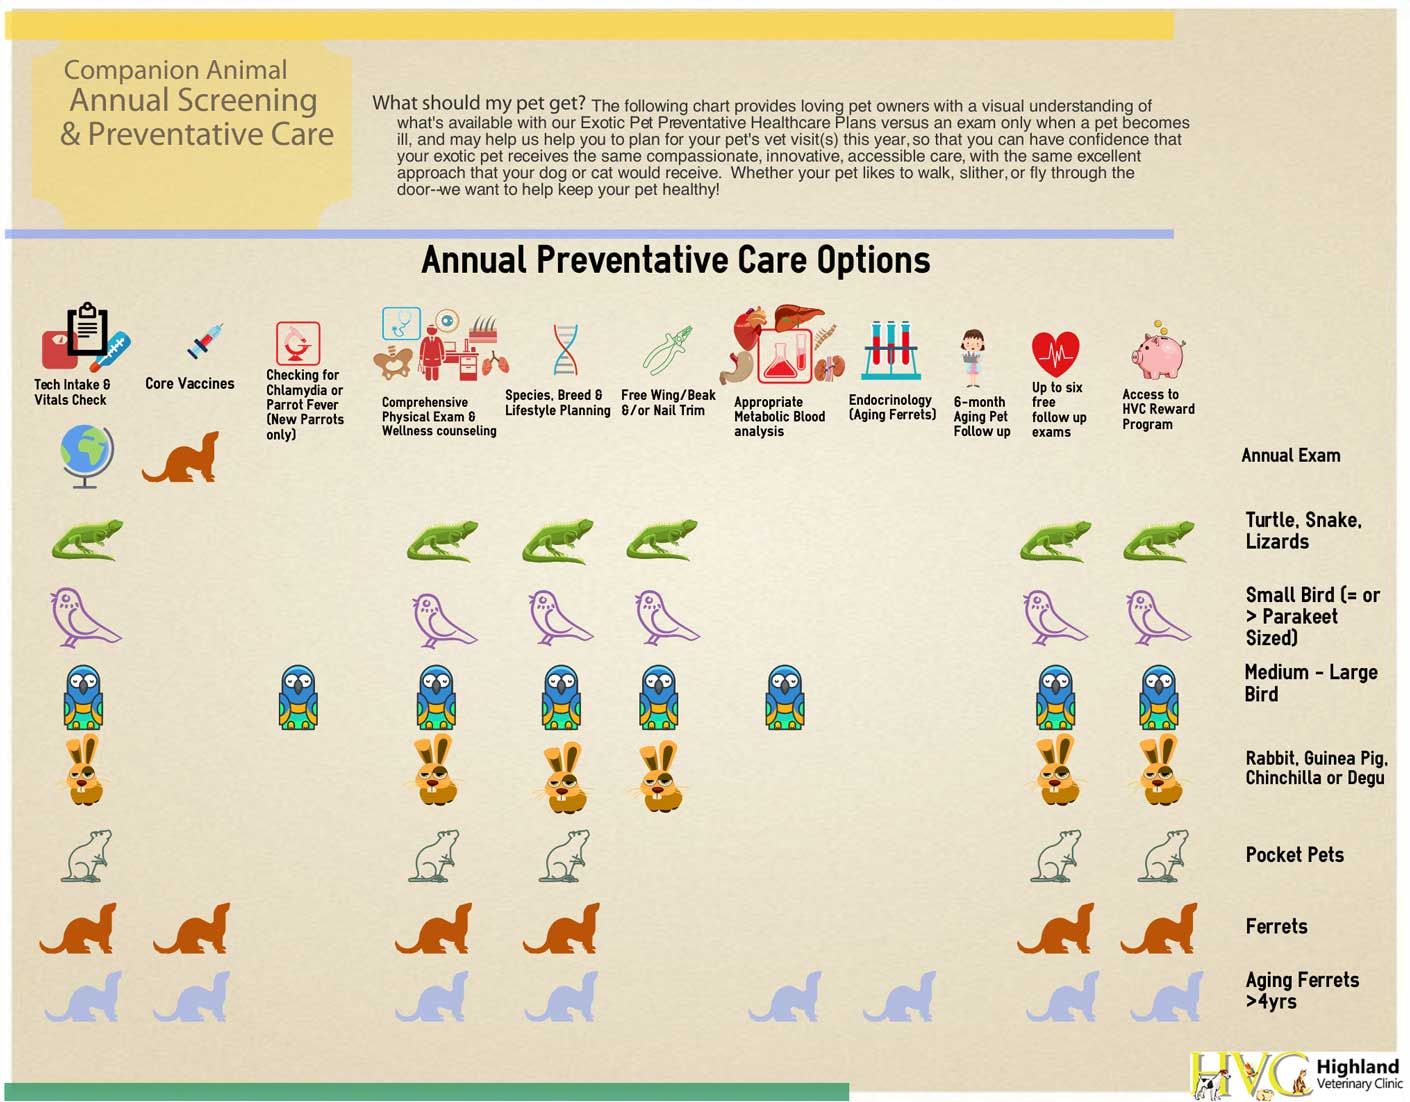 Canine Health Care plans